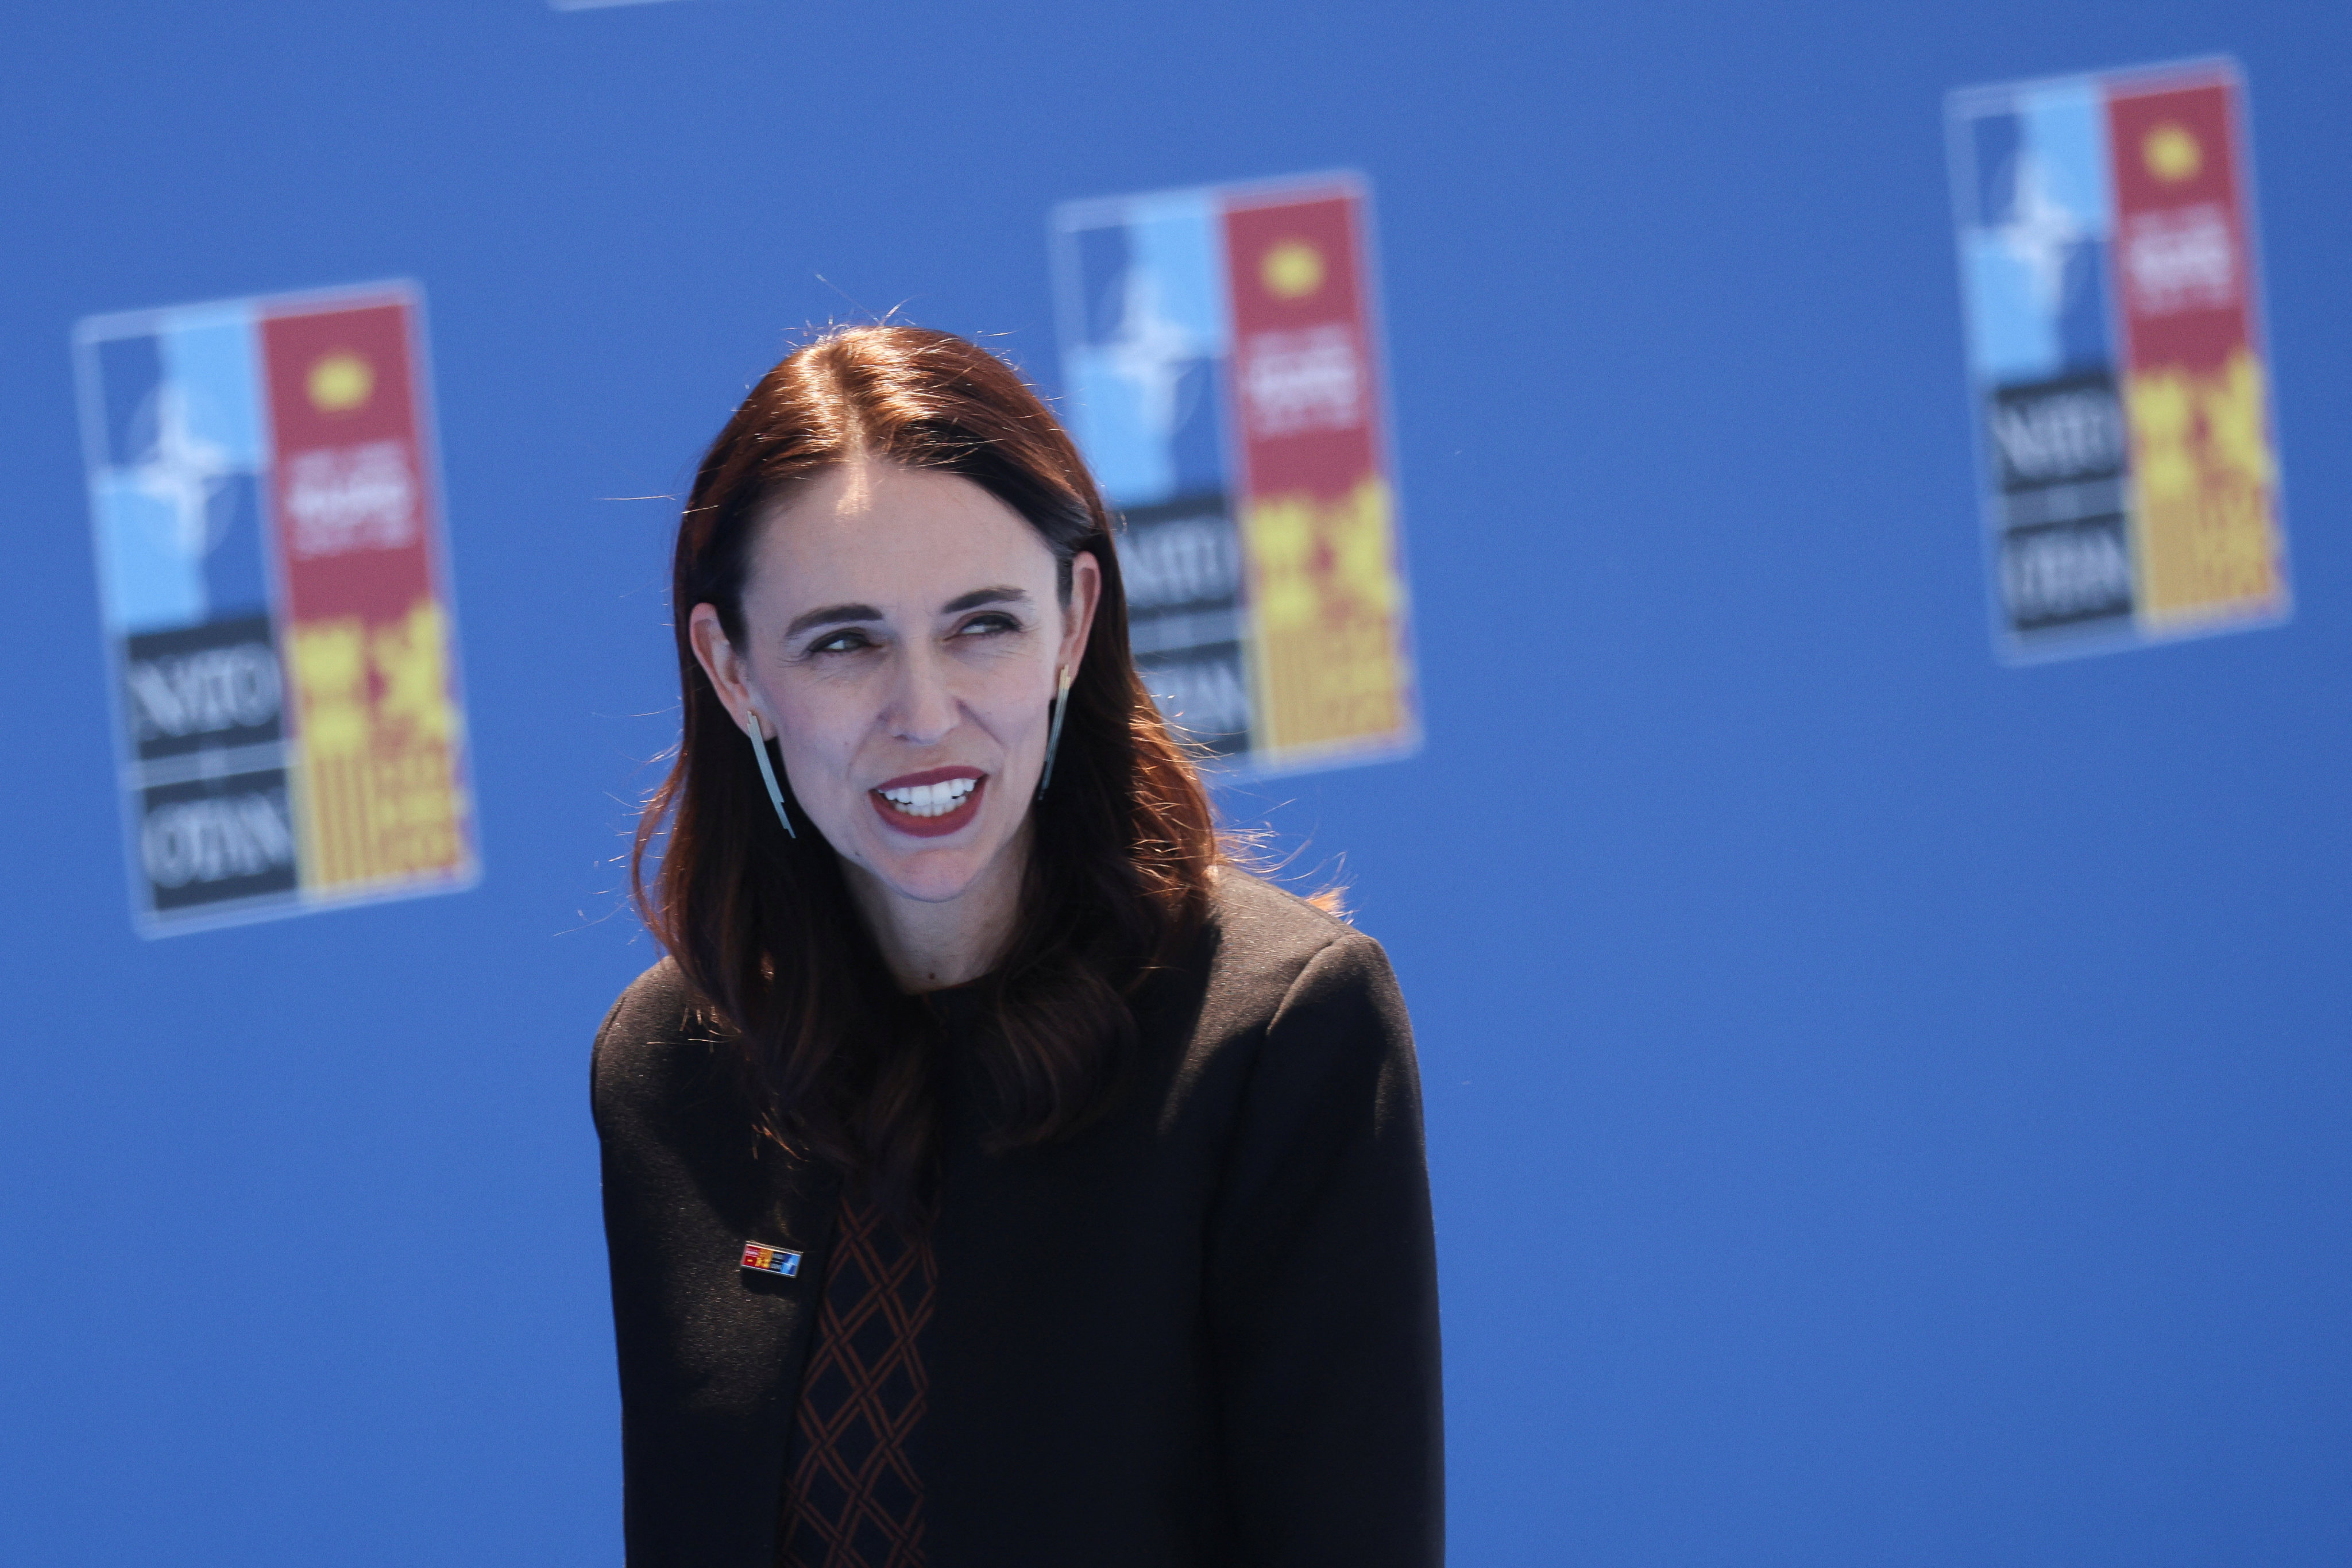 New Zealand Prime Minister Jacinda Ardern said China has become “more assertive and more willing to challenge international rules and norms”, and urged the use of diplomacy and economic links to build ties in the Indo-Pacific region.Photo: Reuters